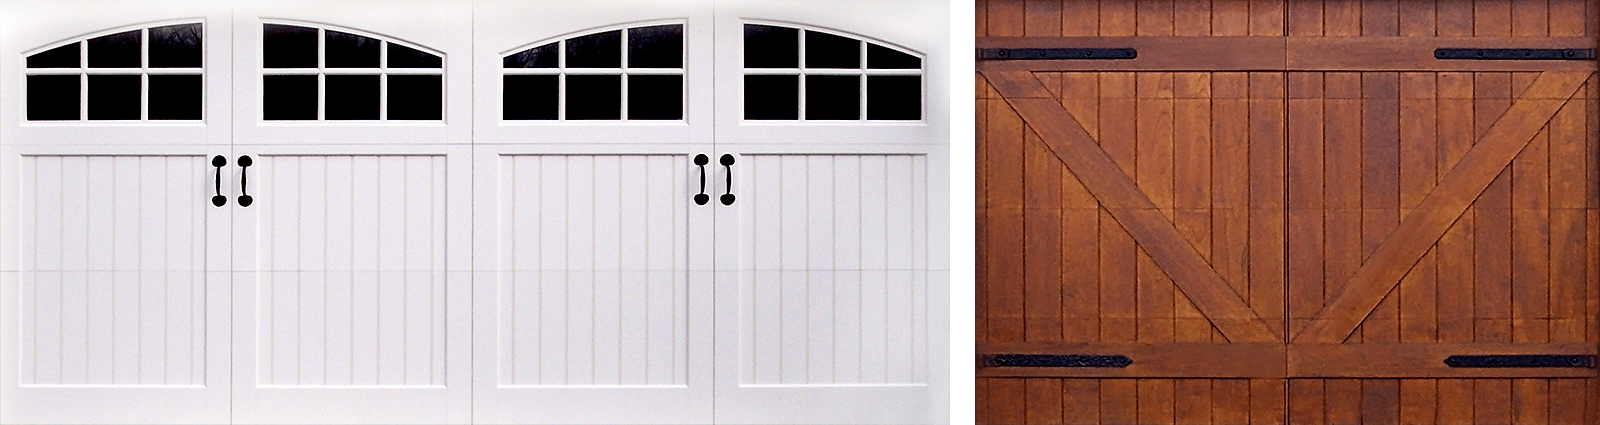 Decorative hardware adds character to otherwise simple doors